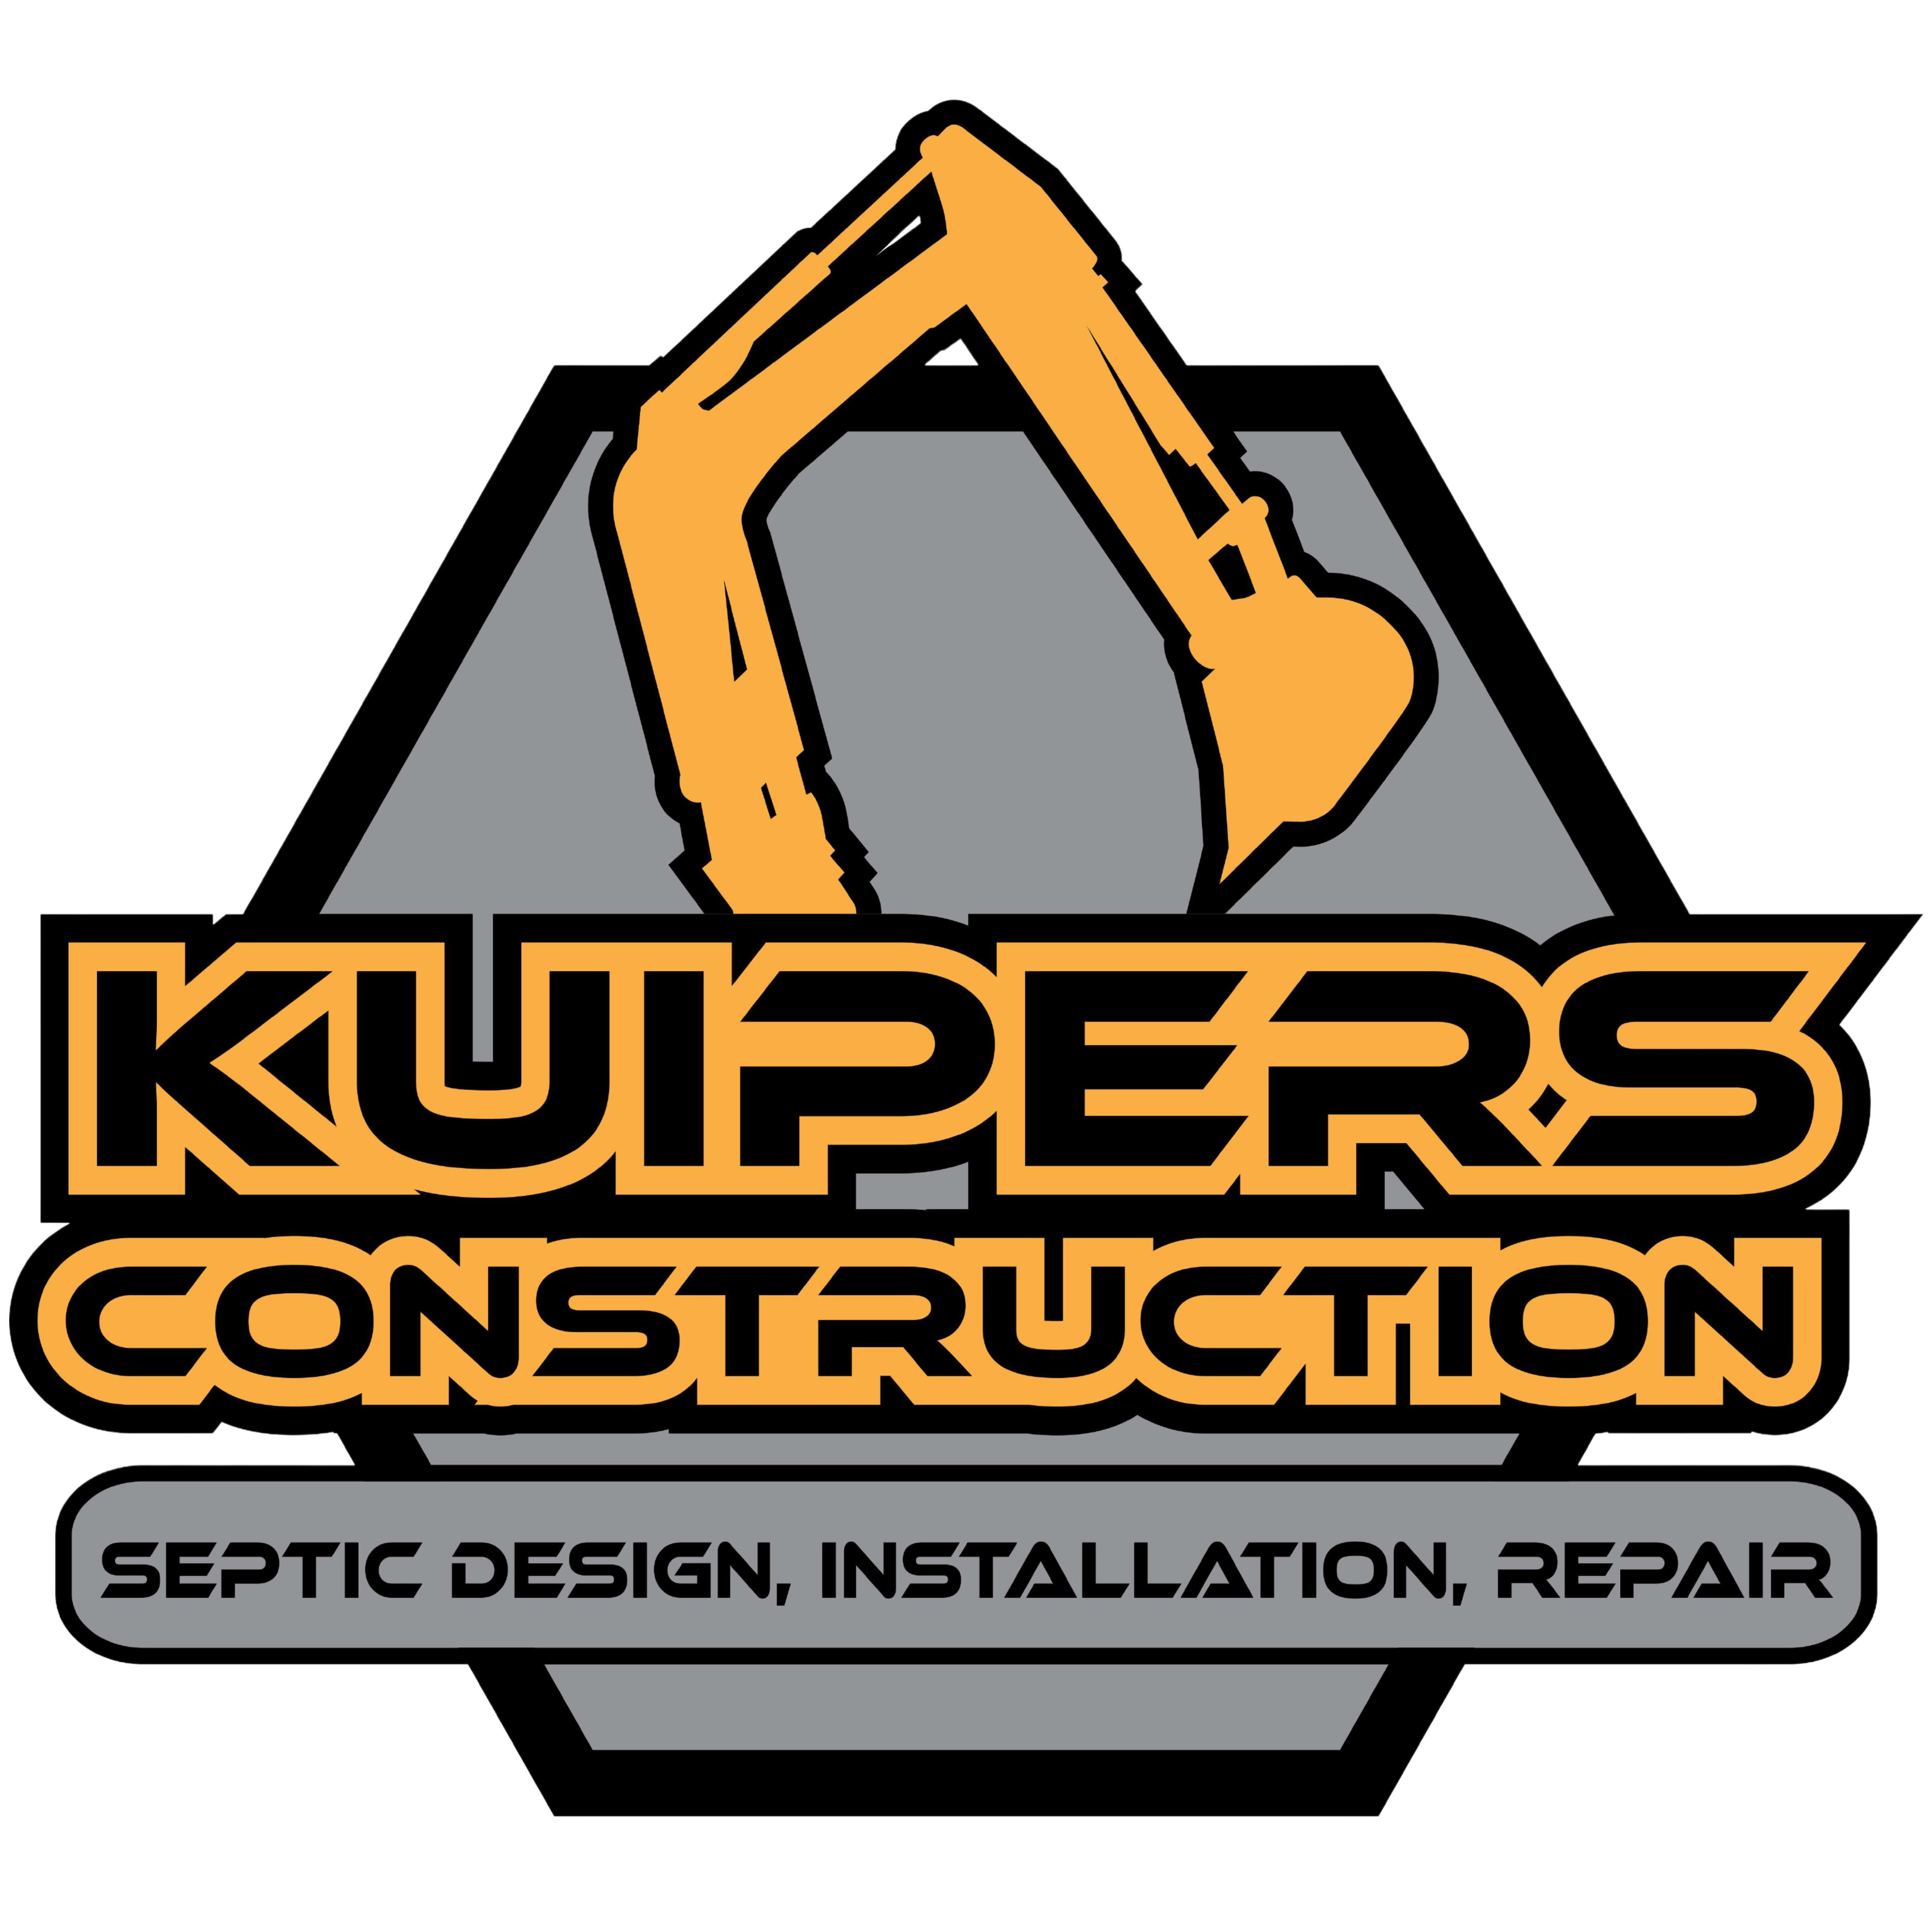 Kuipers Construction